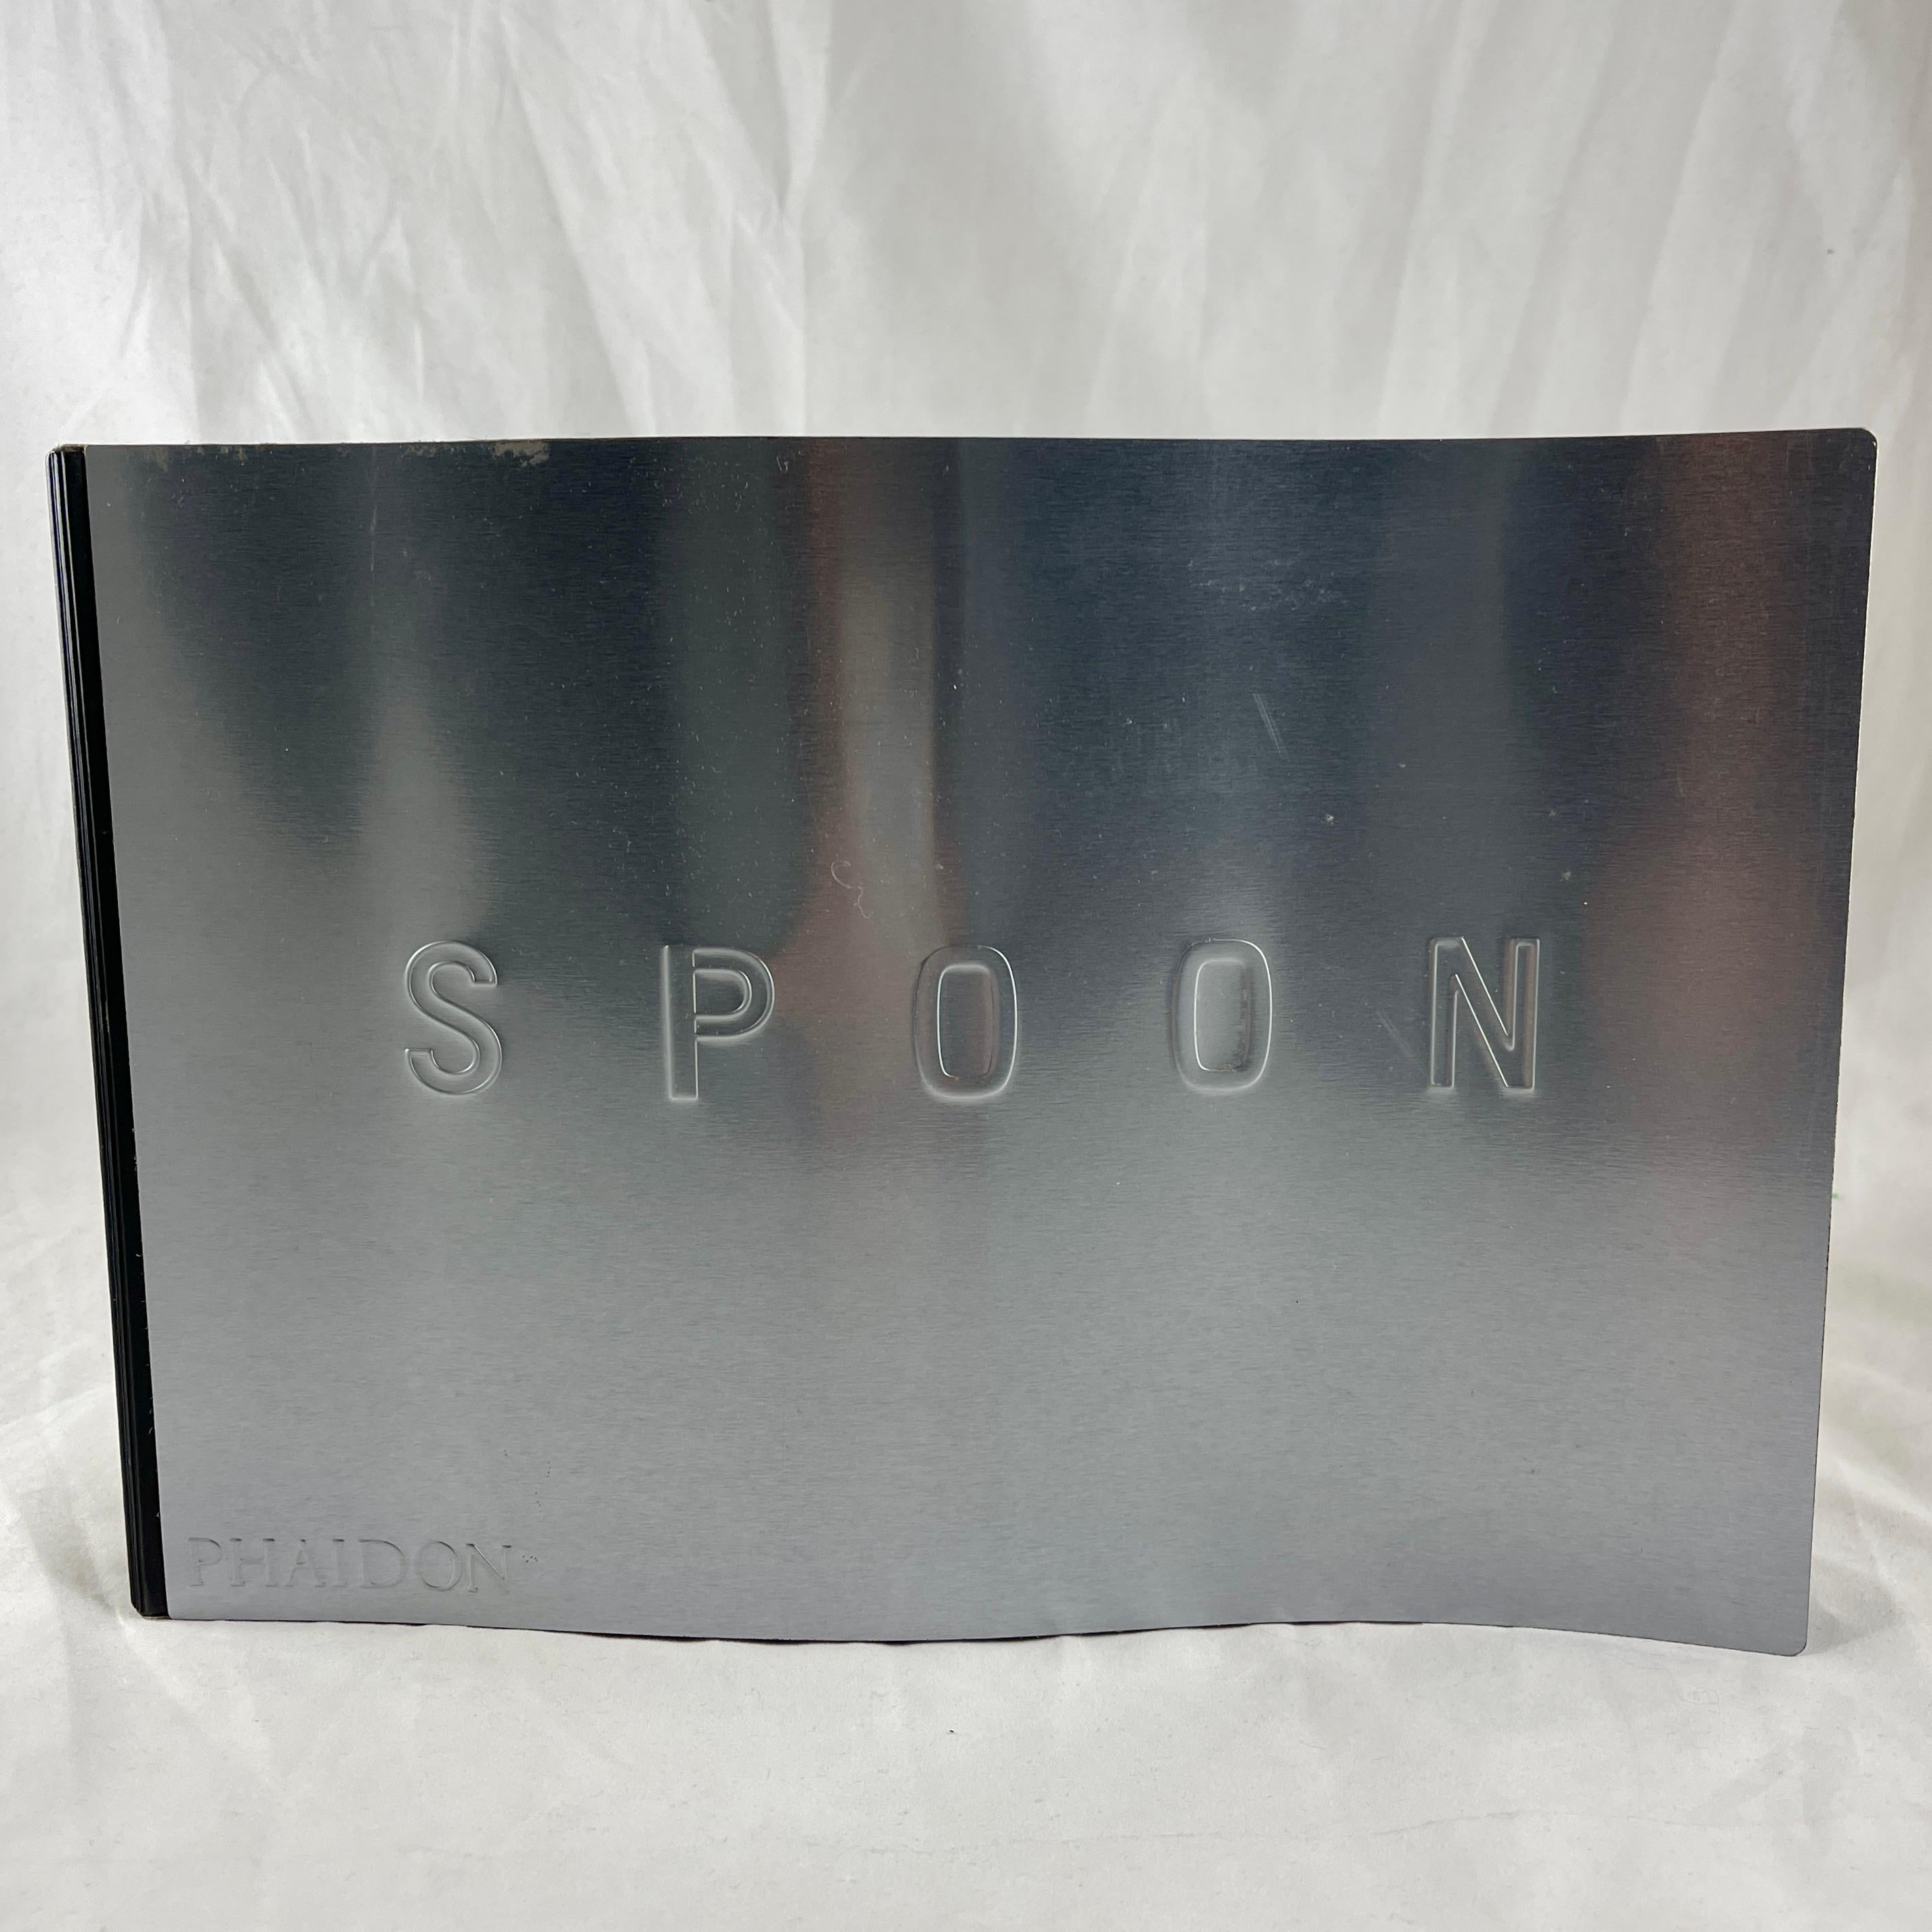 “Spoon” Designed by Mark Diaper, Phaidon Press, 1st Edition 2002

This is the out of print polymer coated Steel version with a cover bent like the silhouette of a spoon.

An award winning catalogue showcasing 100 contemporary industrial designers